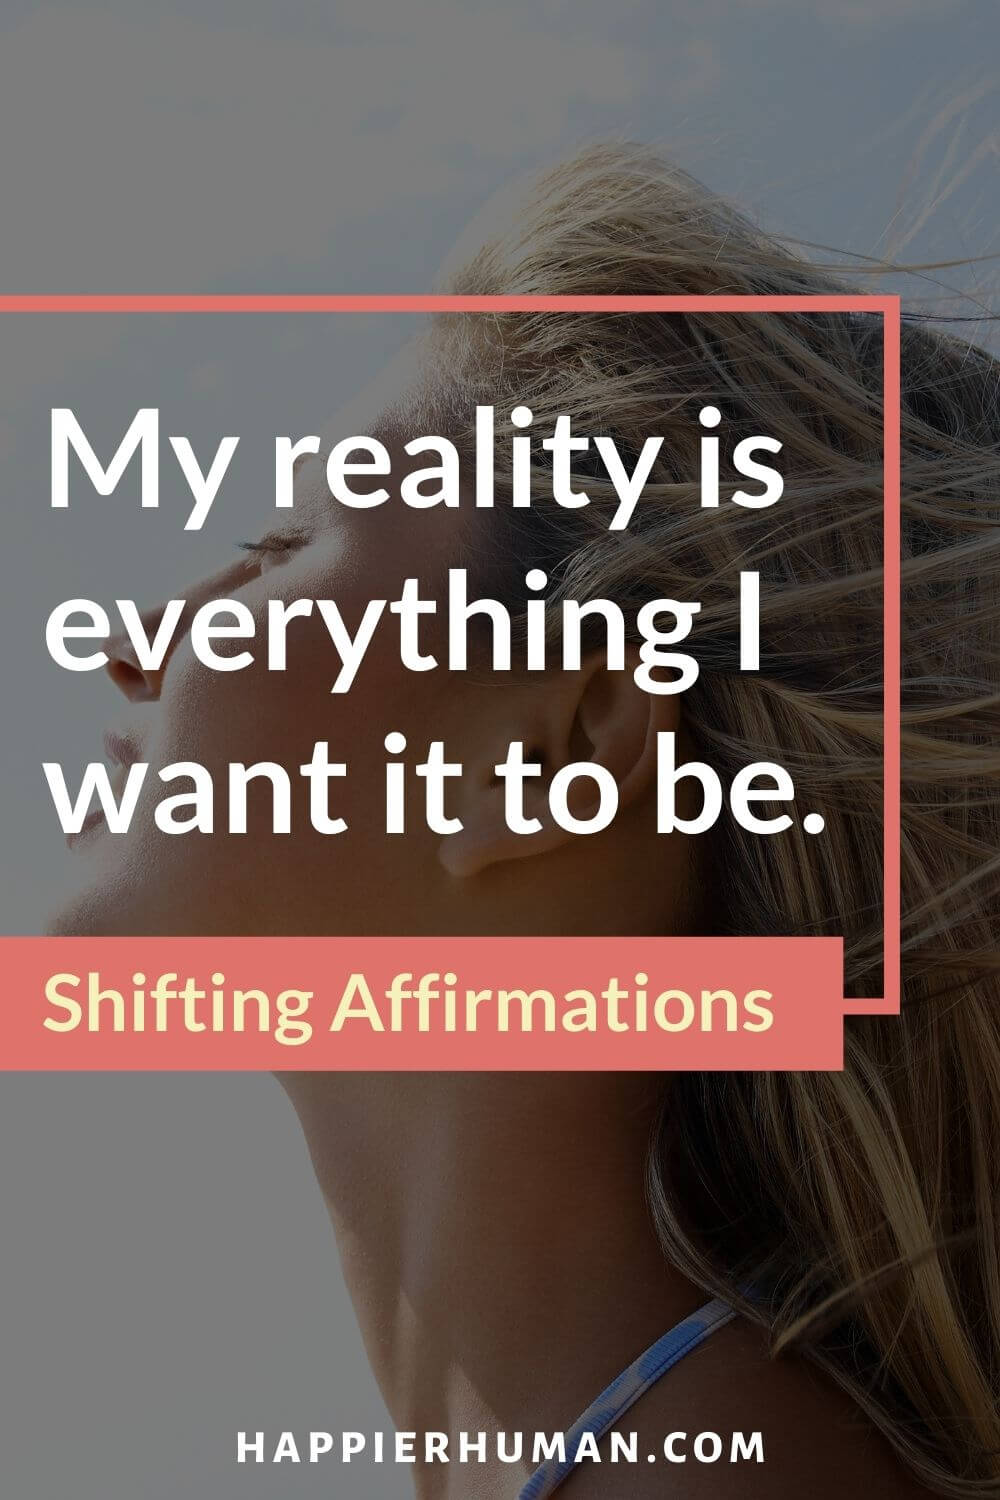 Shifting Affirmations - My reality is everything I want it to be. | shifting affirmations mha | shifting affirmations mcu | shifting affirmations marvel